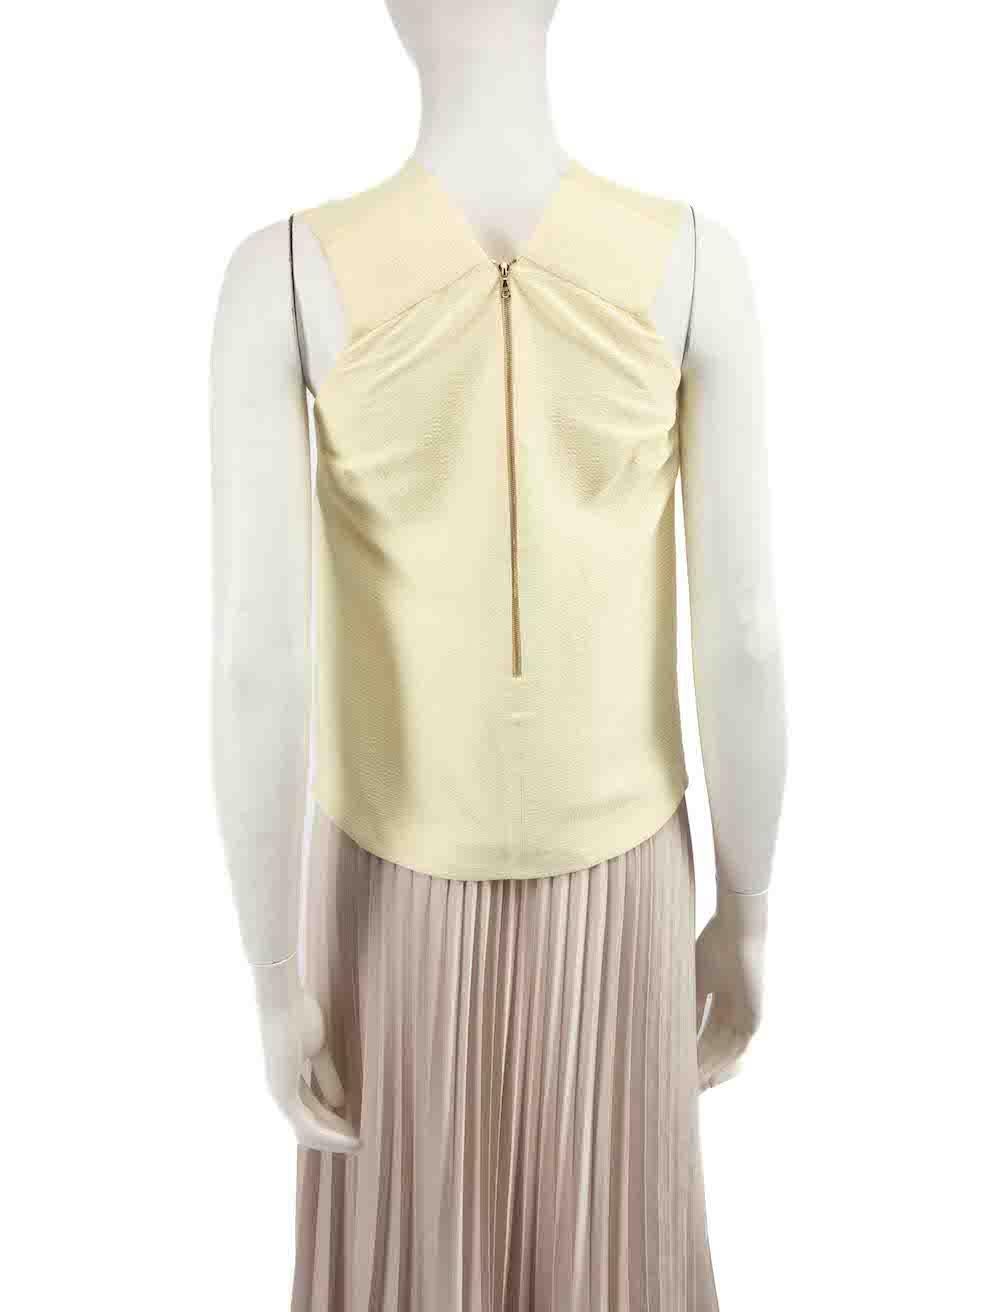 Sandro Yellow Zip Front Top Size S In New Condition For Sale In London, GB